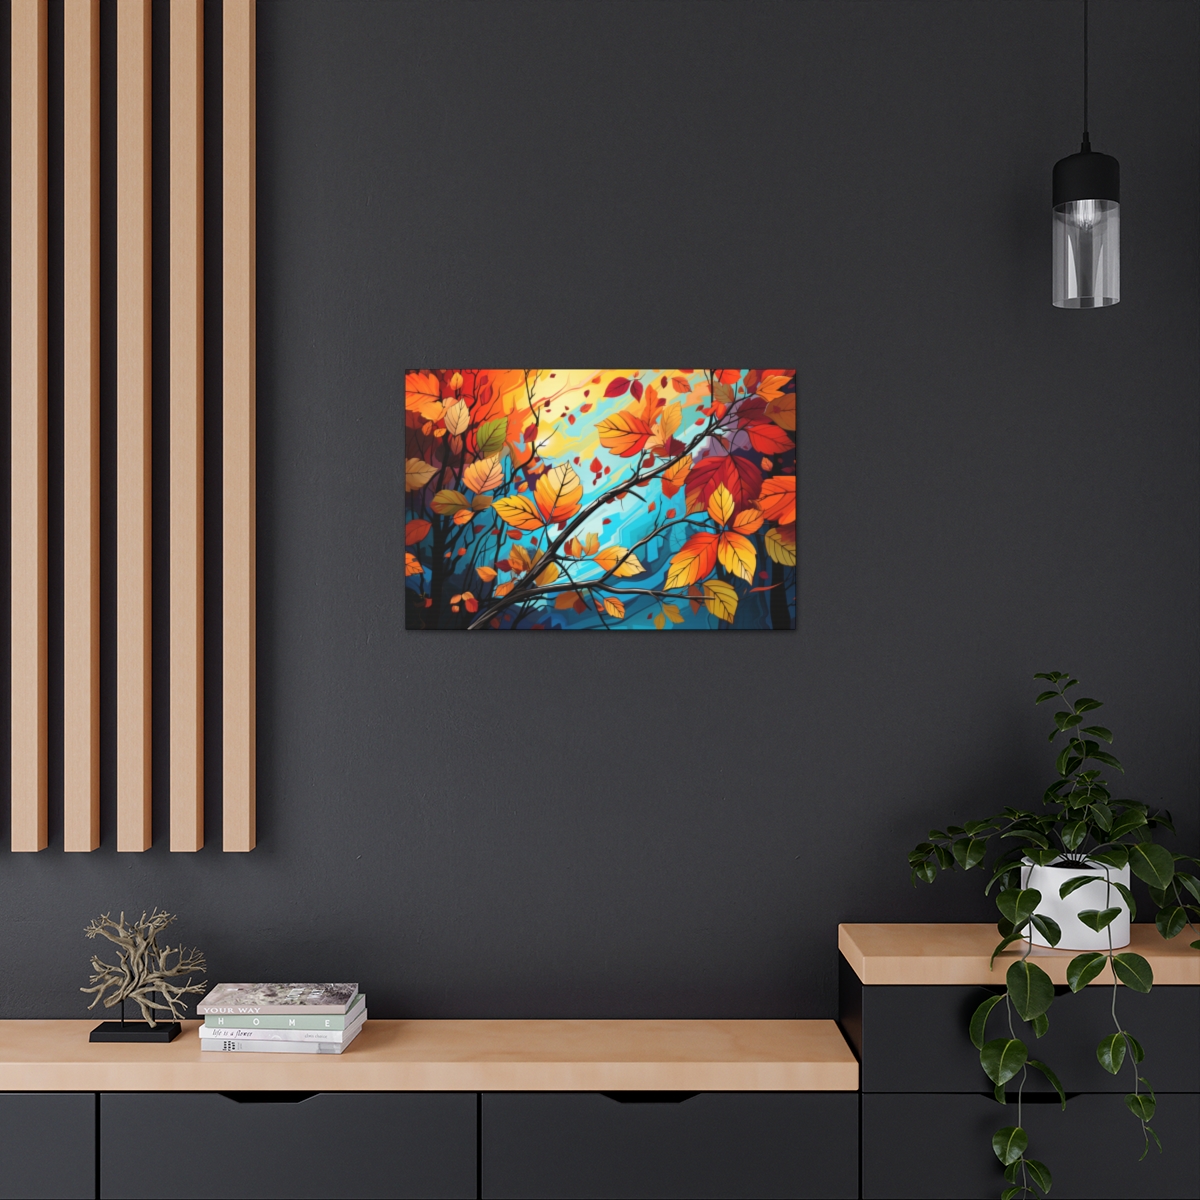 Autumn Forest Wall Art Canvas Print: Colorful Tapestry of Nature